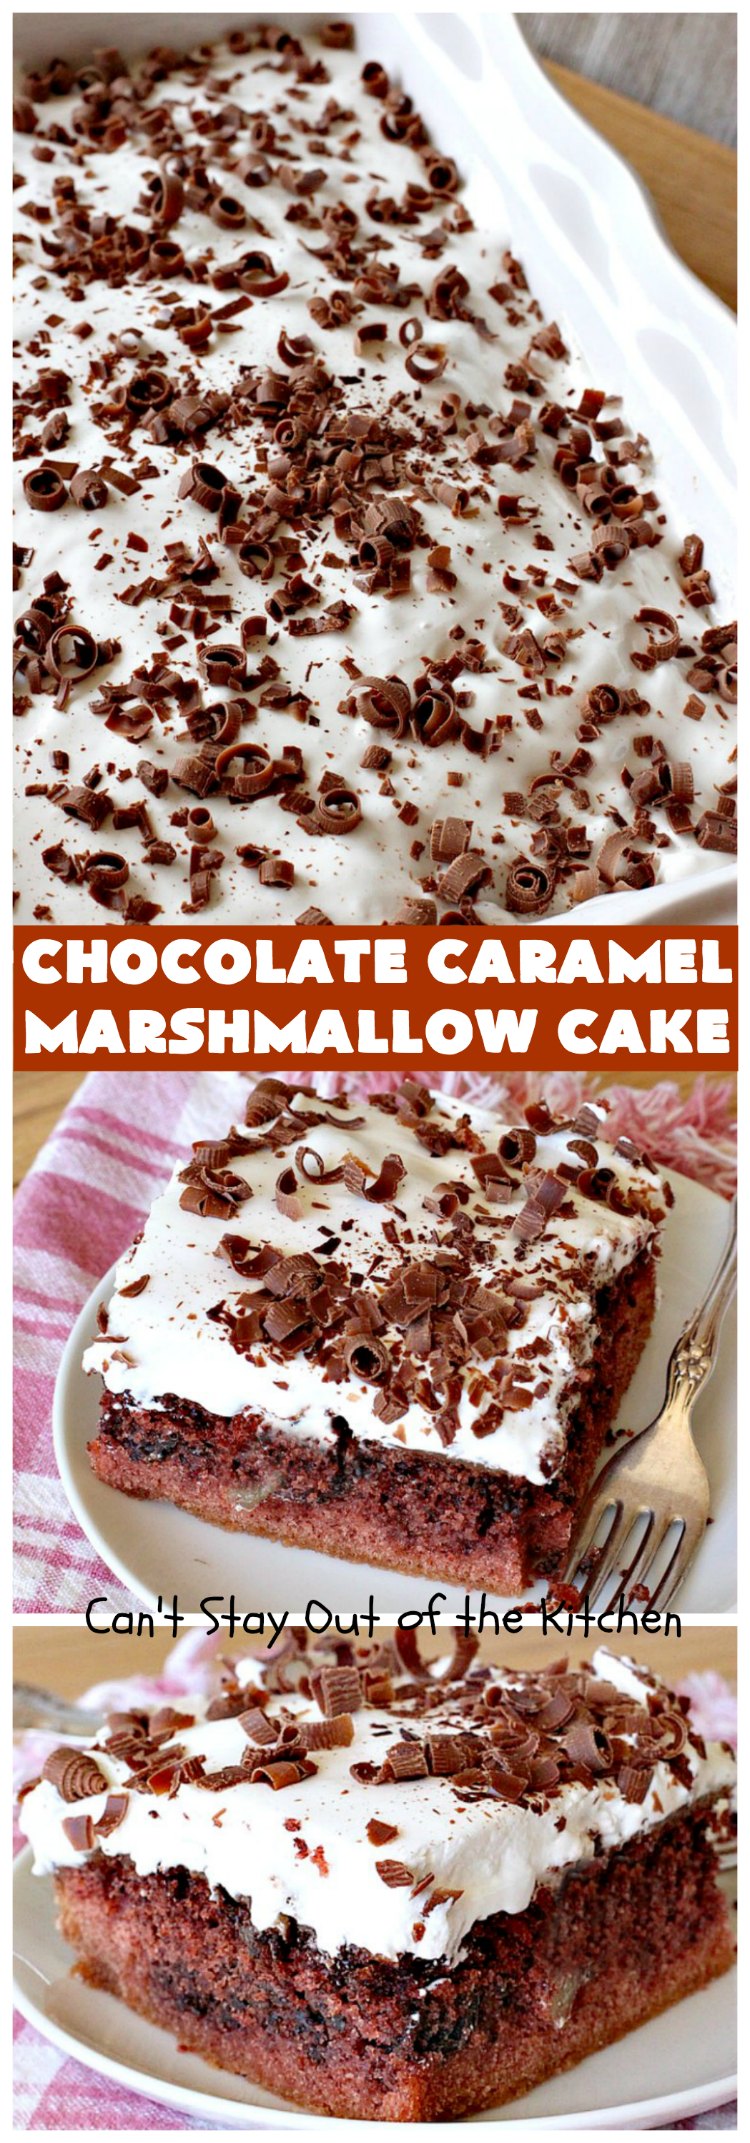 Chocolate Caramel Marshmallow Cake | Can't Stay Out of the Kitchen